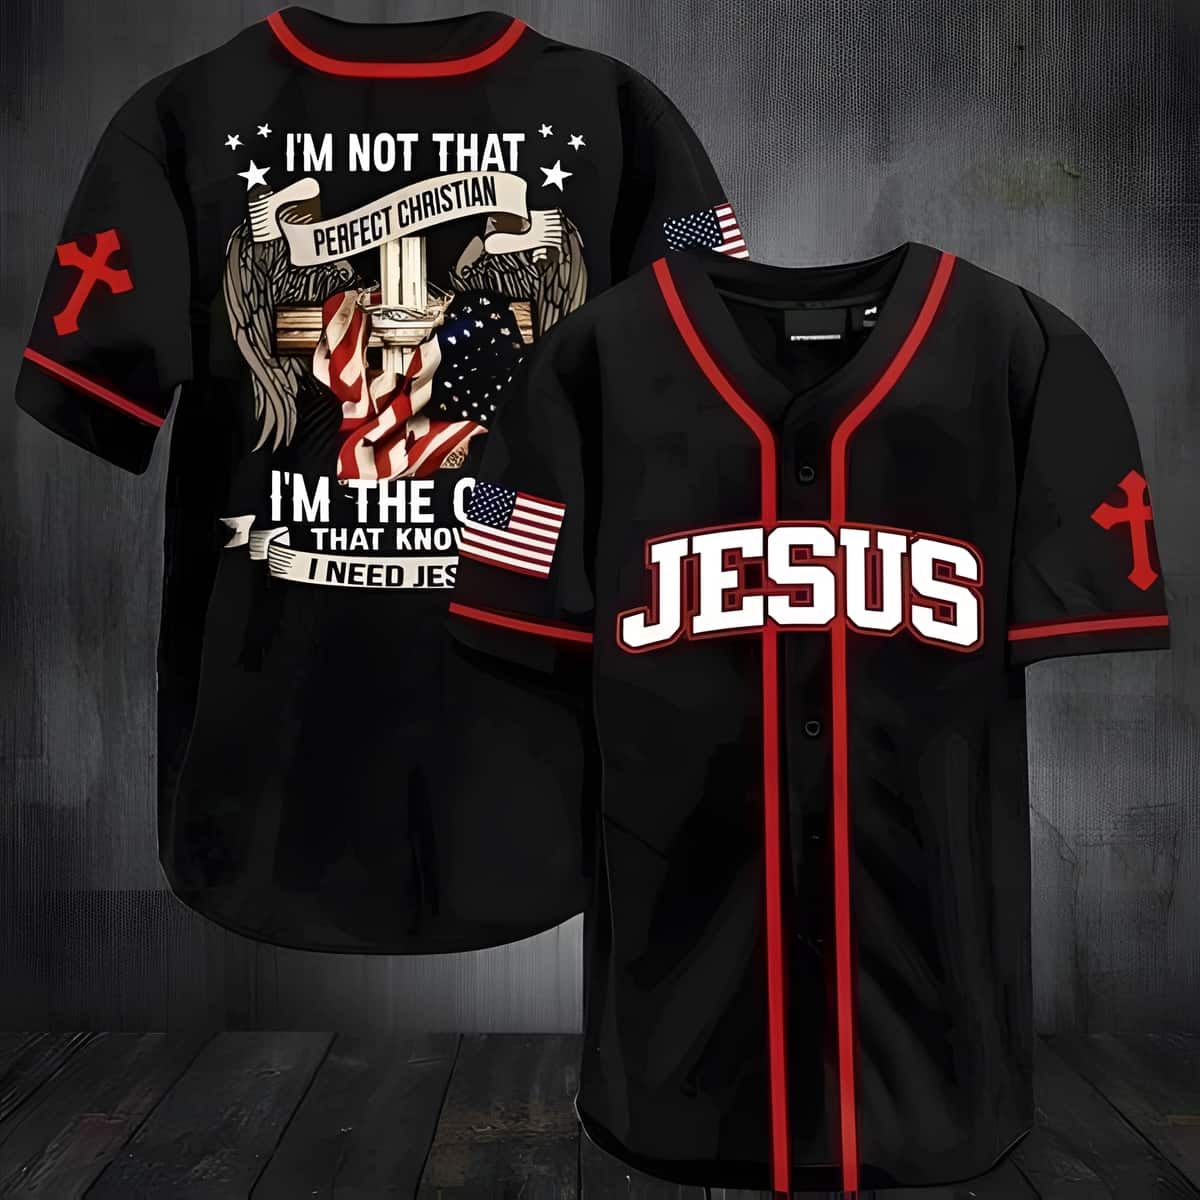 I Need Jesus Baseball Jersey I’m Not That Perfect Christian I’m The One That Knows US Flag Cross 4th Of July